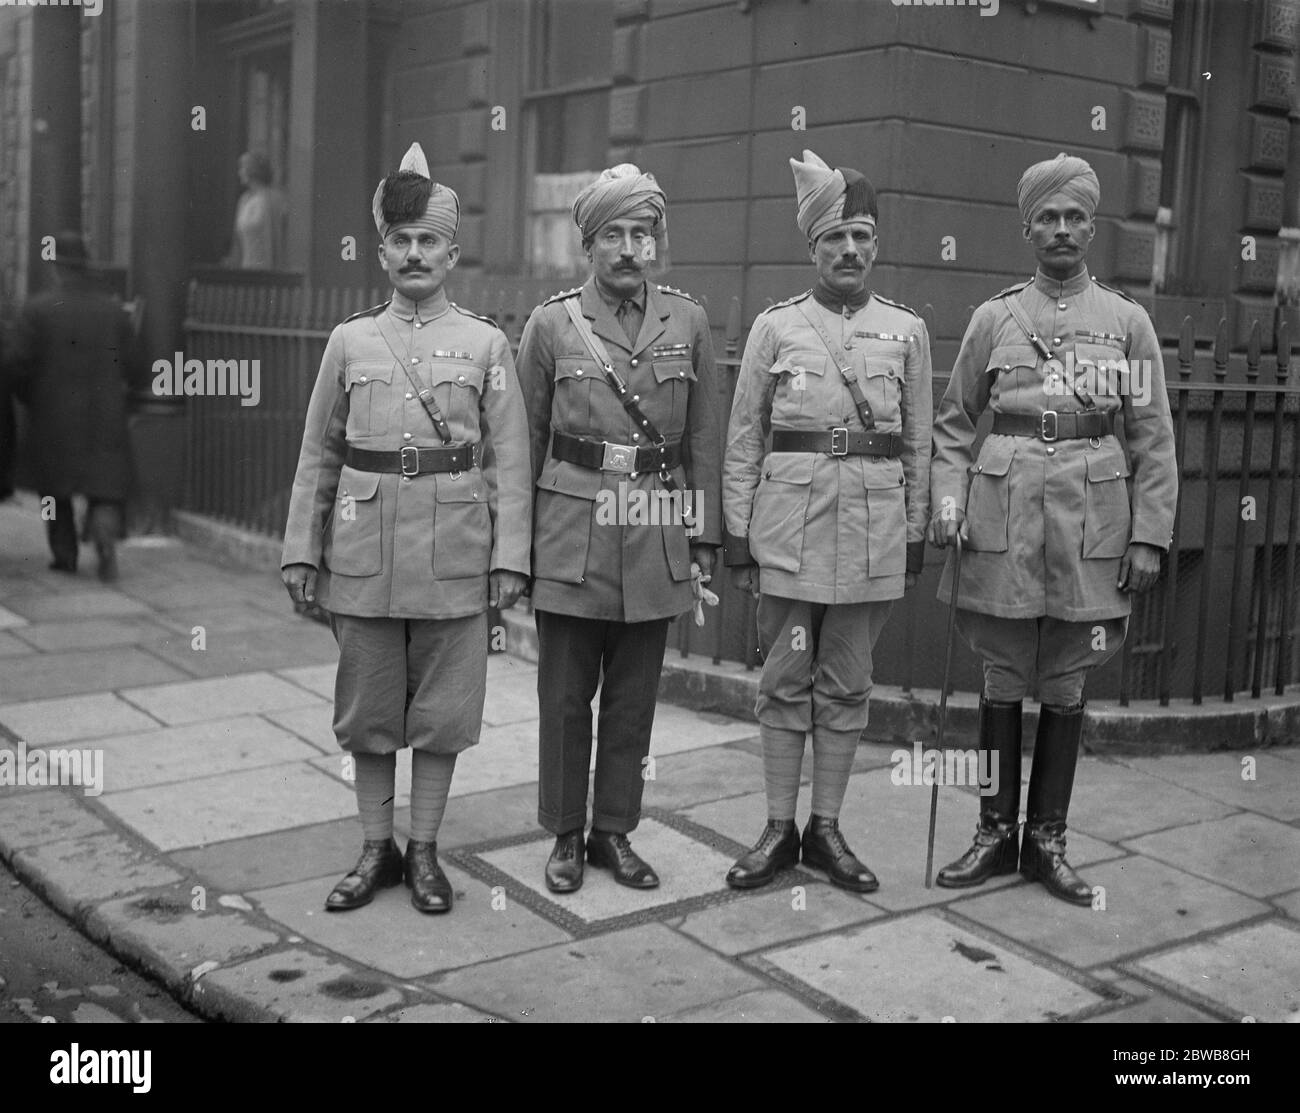 The King 's new Indian Army orderlies arrive in London . The King 's new Indian Army Orderlies photographed at their headquarters on arriving in London . Subadar Major Amin Gul , 2/14th Punjab Regiment . Risaldar Zardad Khan , IDSM , 10th Queen Victoria 's Own Corps of Guides Cavalry . Subadar Yar Ghulam , 4/13th Frontier Force Rifles . Risaldar Major Amir Muhammad Khan , Bahadur , IDSM , OBI , 3rd Cavalry . 4 April 1924 Stock Photo